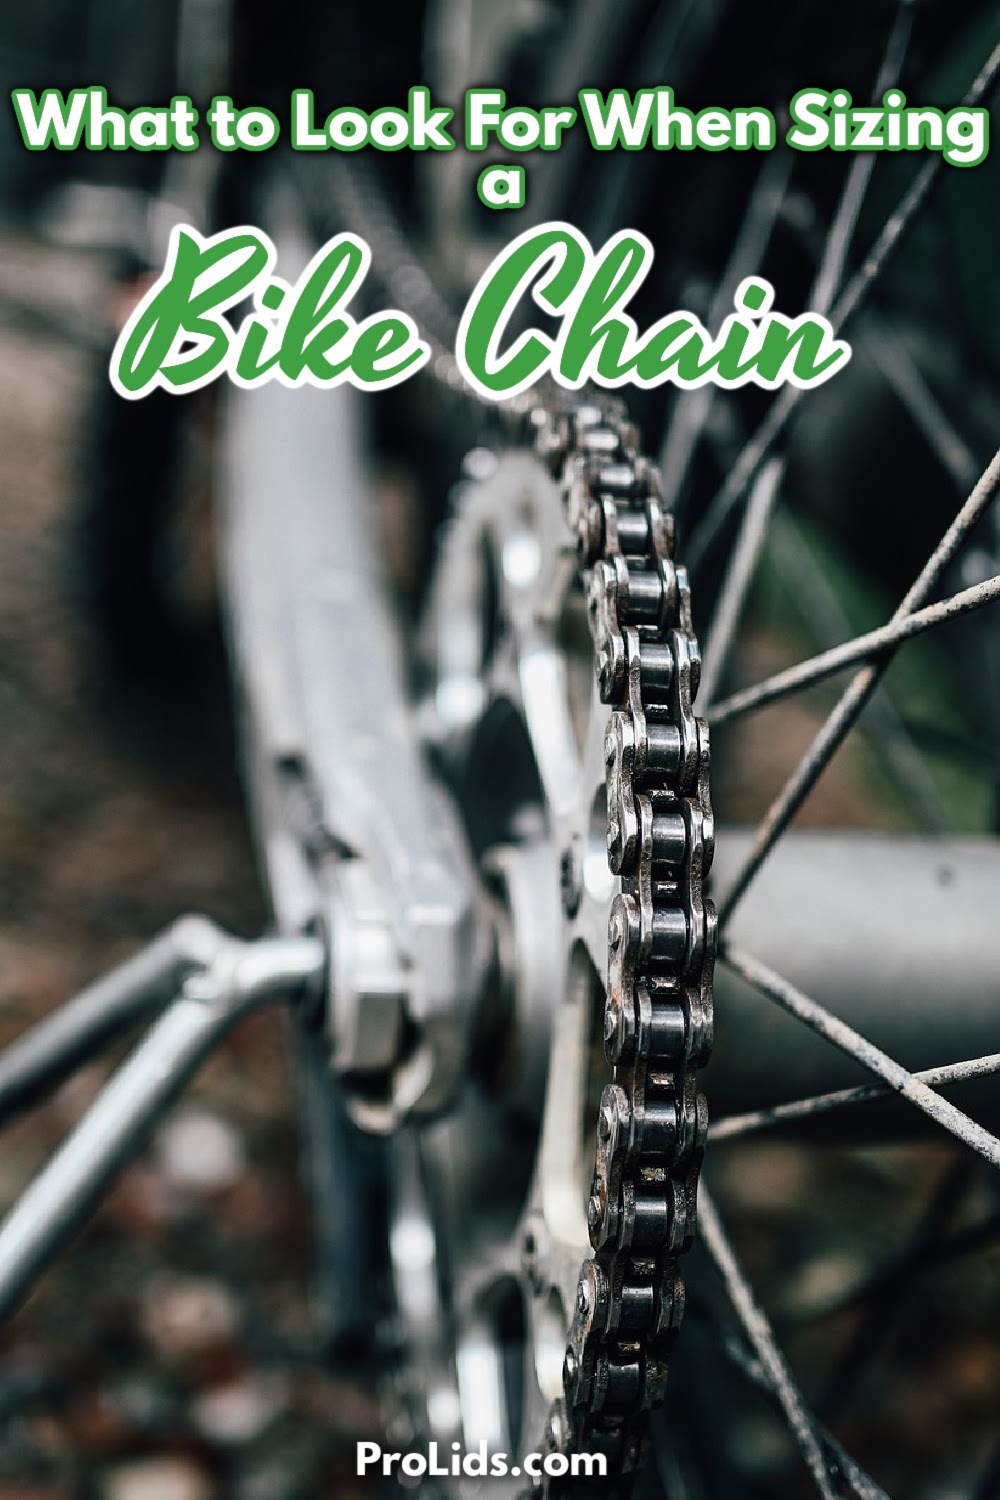 Knowing what to look for when sizing a bike chain can help you extend the longevity of your bike and your children’s bikes.